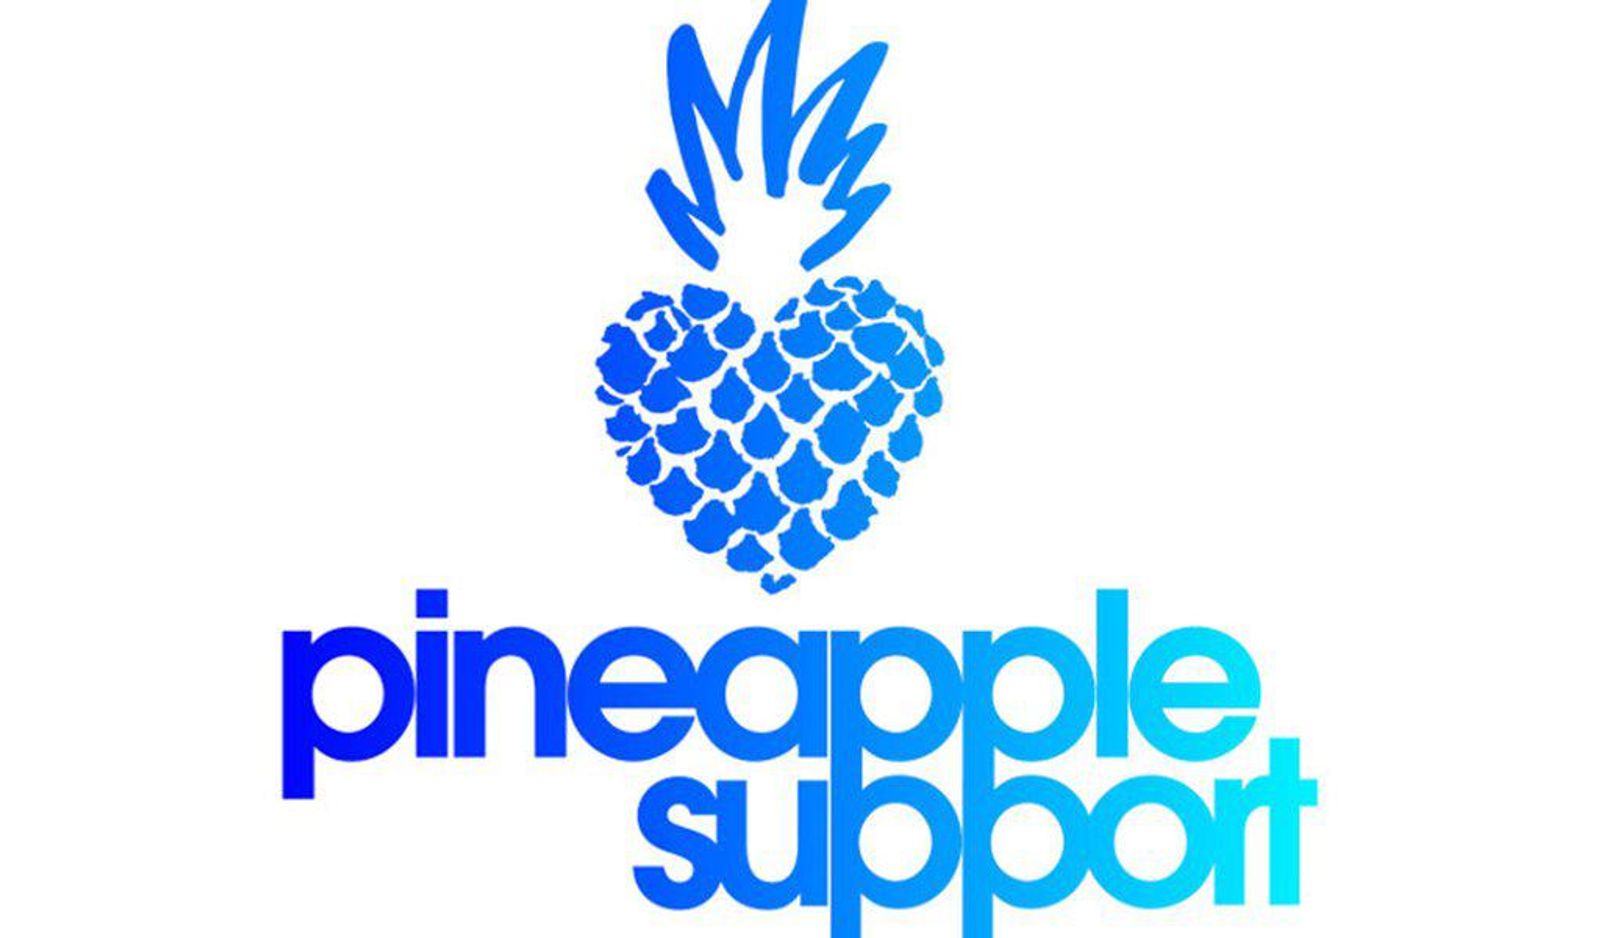 Pineapple Support Expands Its Services in South America